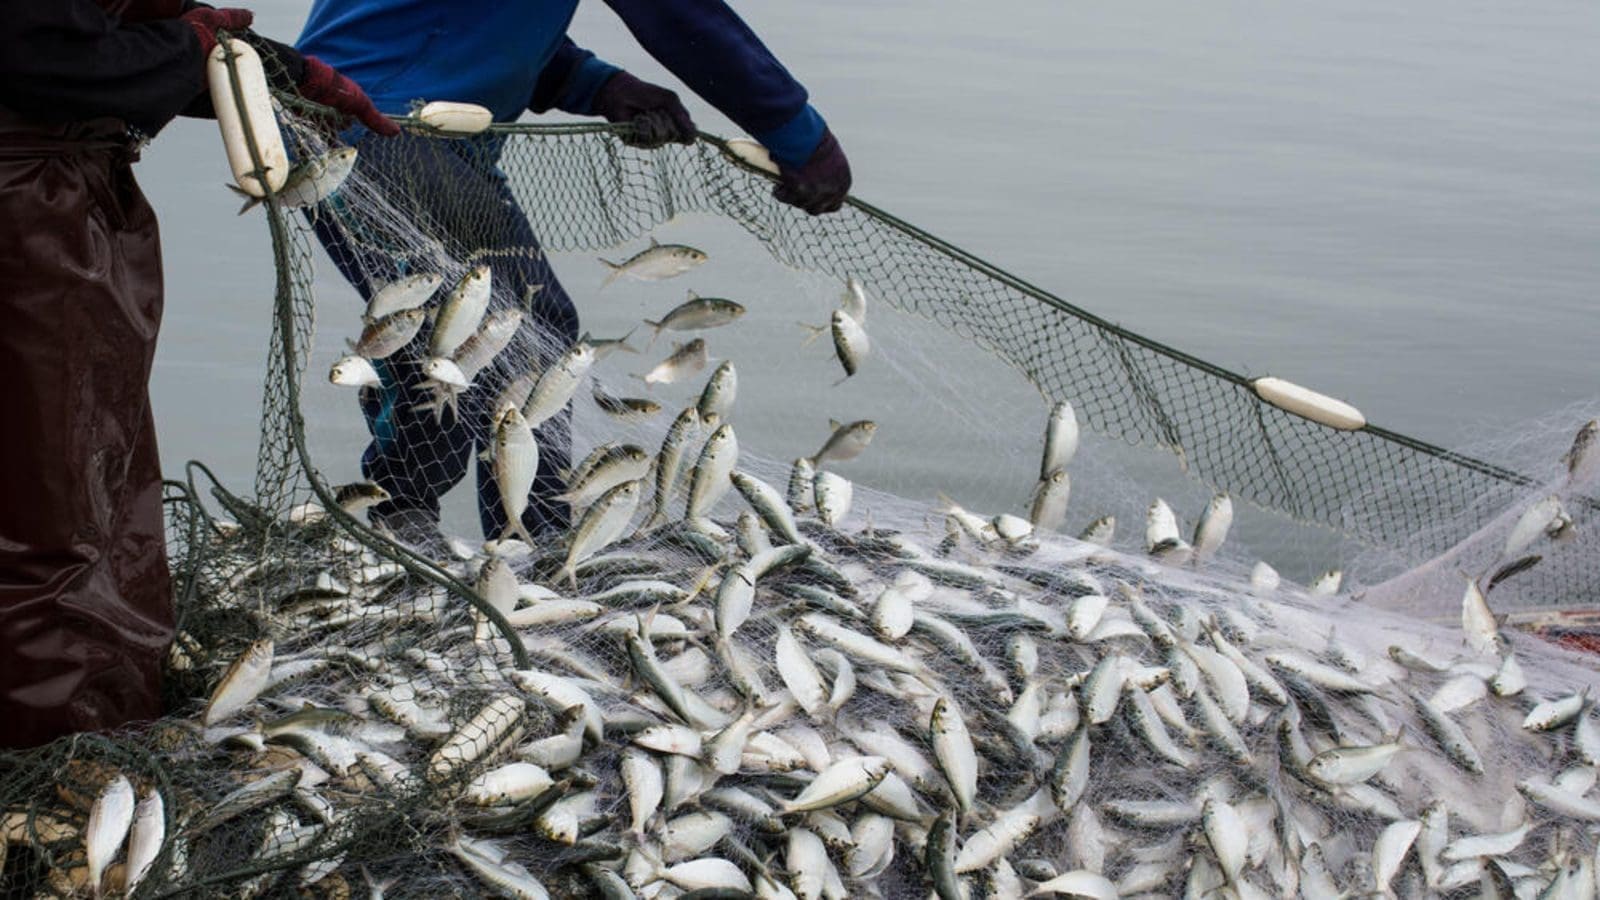 Cote d’Ivoire to set aside US$1.6B to strengthen livestock and aquaculture sectors